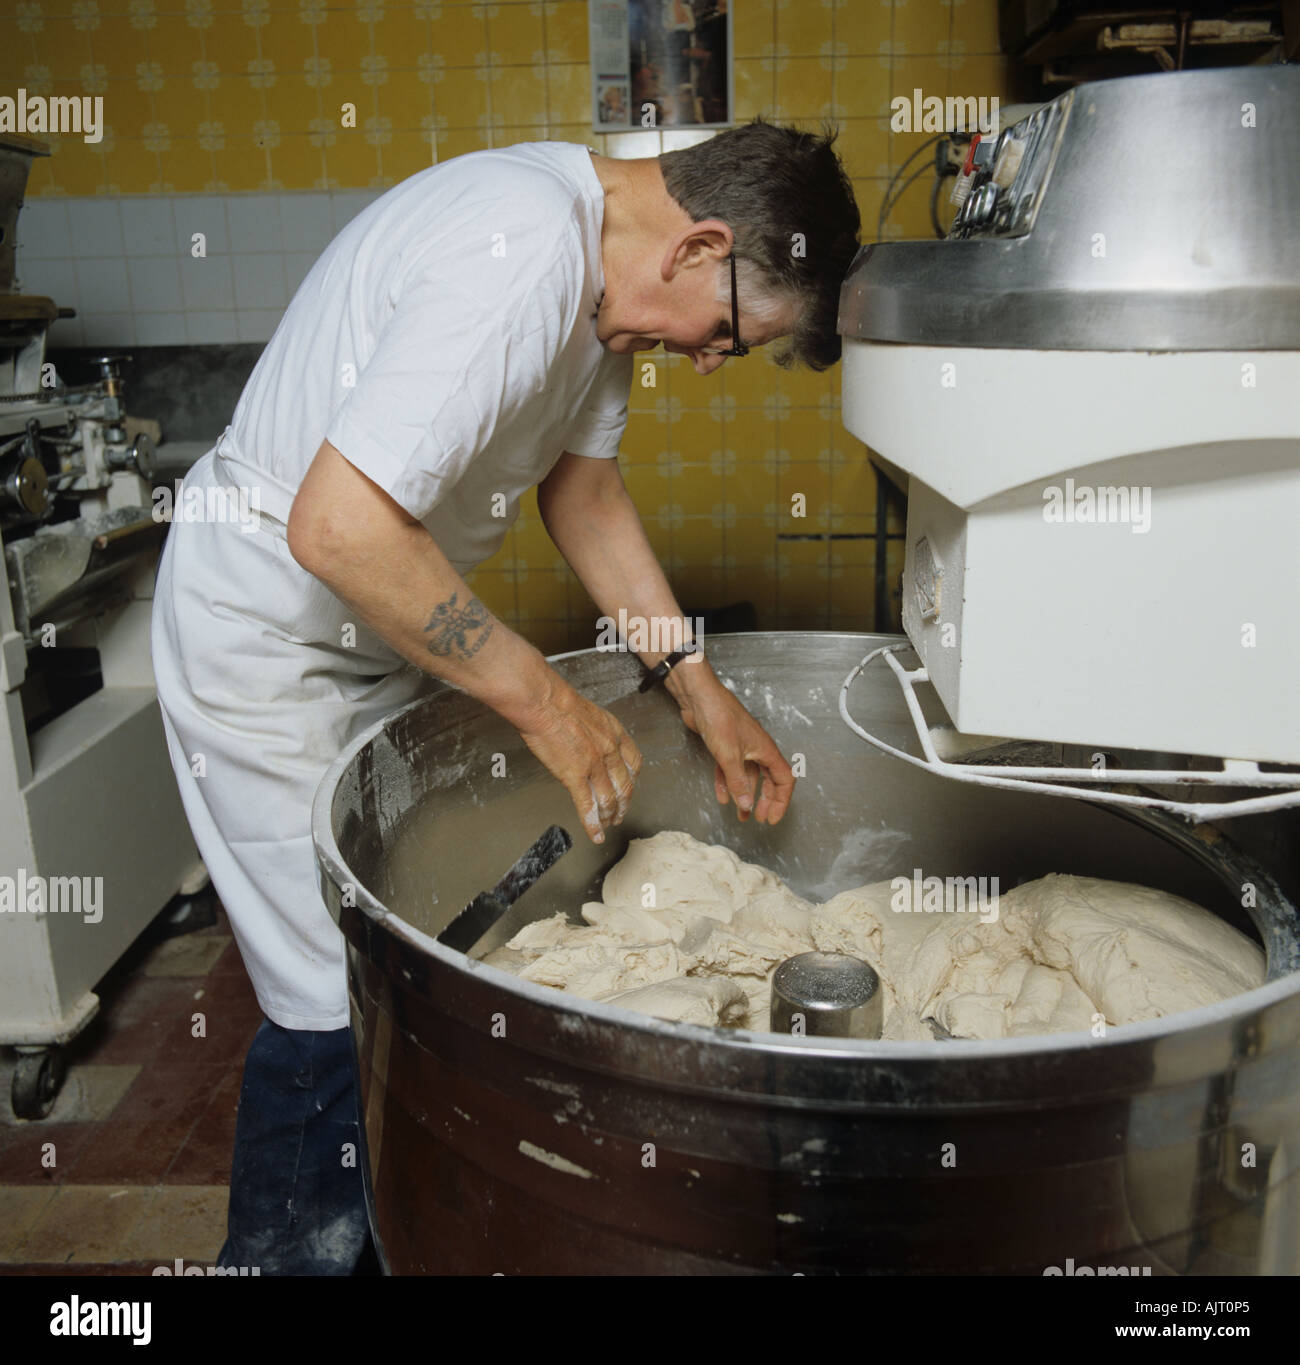 Baker removing dough from large machine for commercial bread making Stock Photo